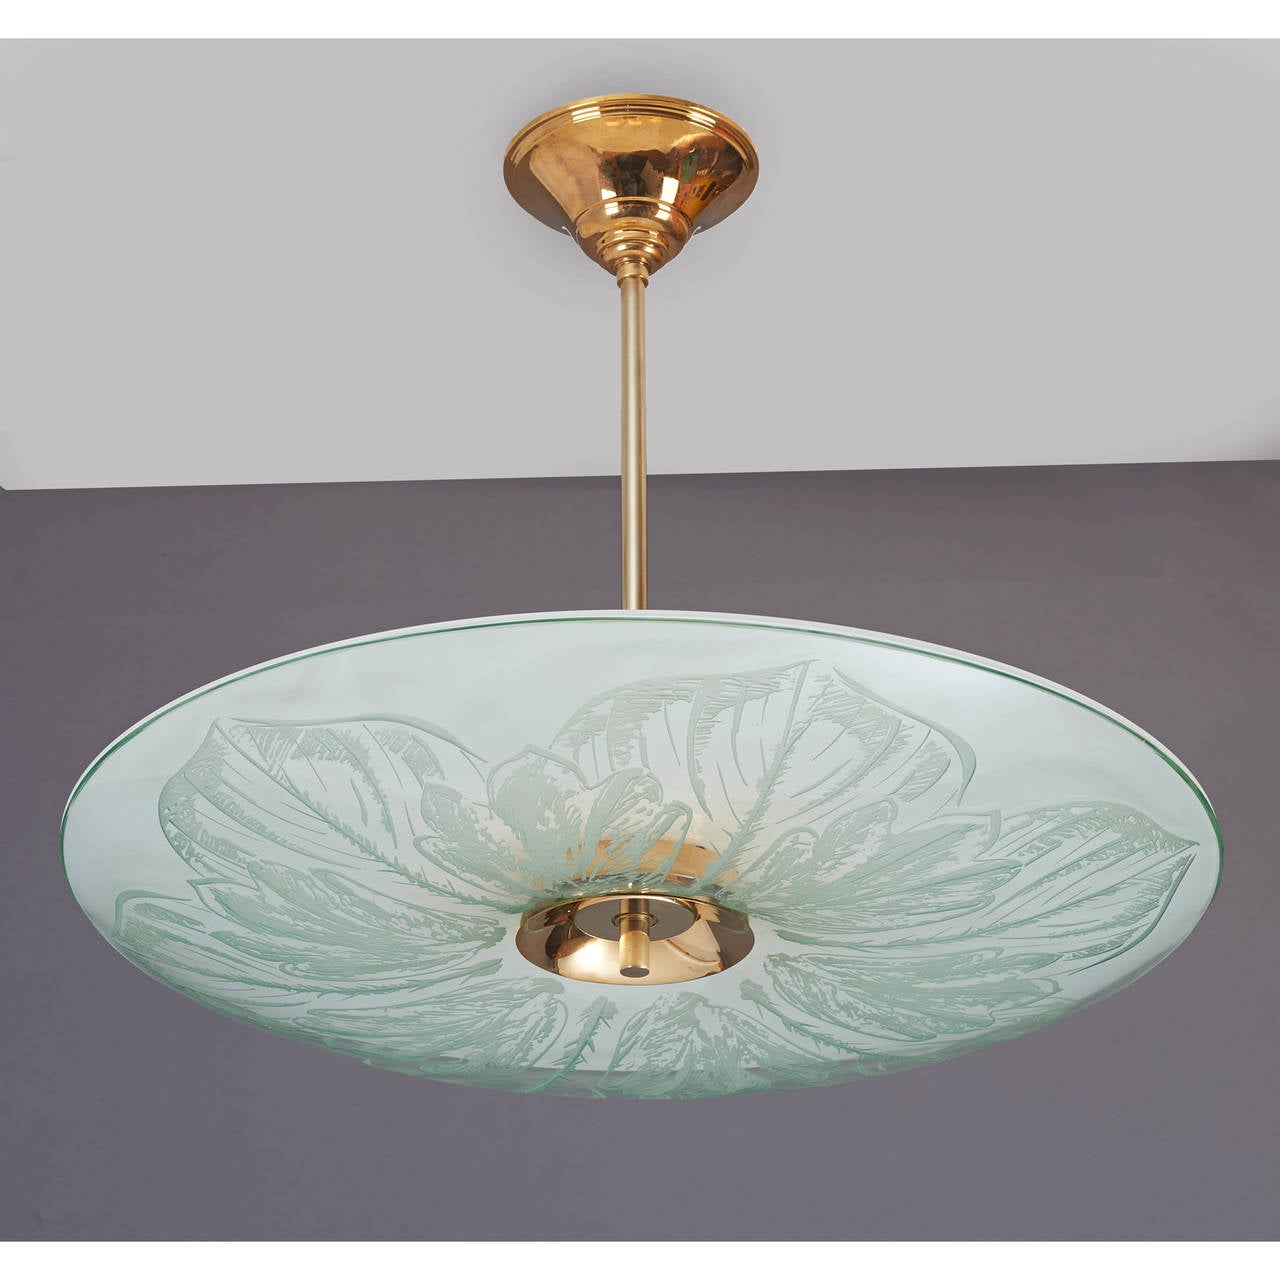 Pietro Chiesa (1892-1948) for Fontana Arte.

Glass chandelier with acid etched foliate decor and polished brass mounts,
Italy, 1930s.

Signed.

Rewired for use in the U.S.